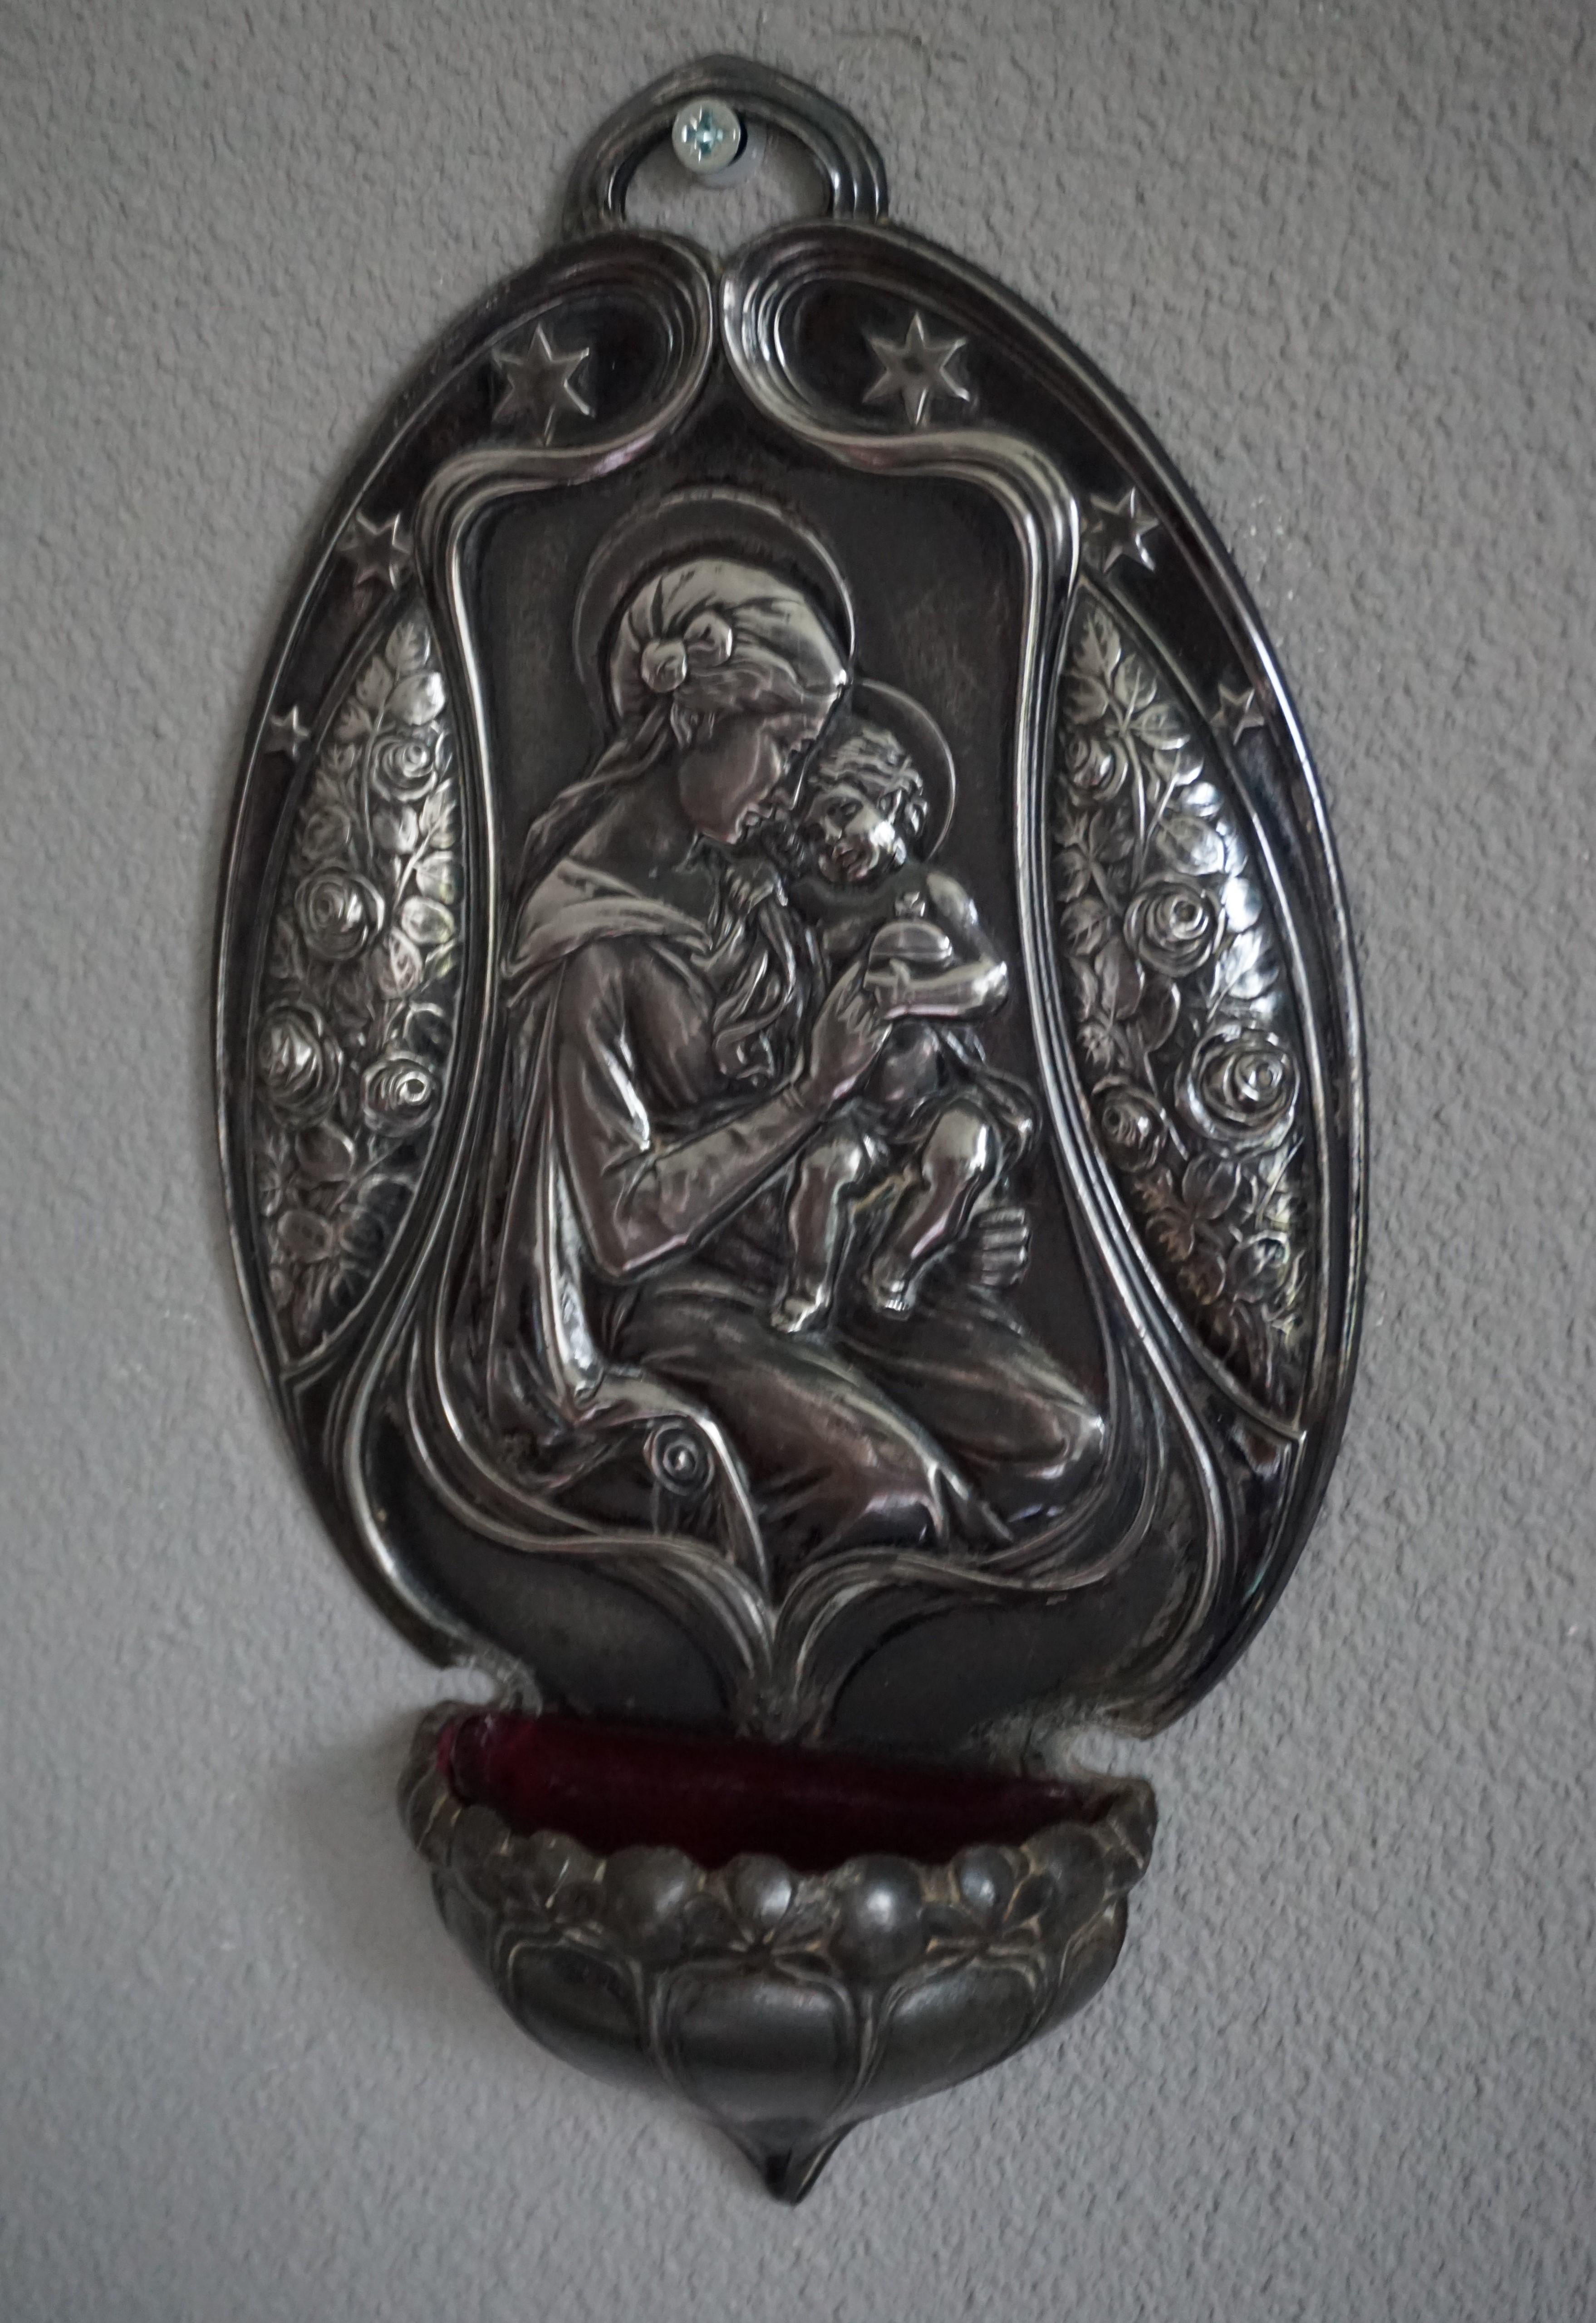 Antique silvered wall font with original and excellent condition glass vessel.

This rare Jugendstil wall font by German makers WMF is in excellent condition and it even comes with the original glass vessel. To make the marvelous image of Mary and